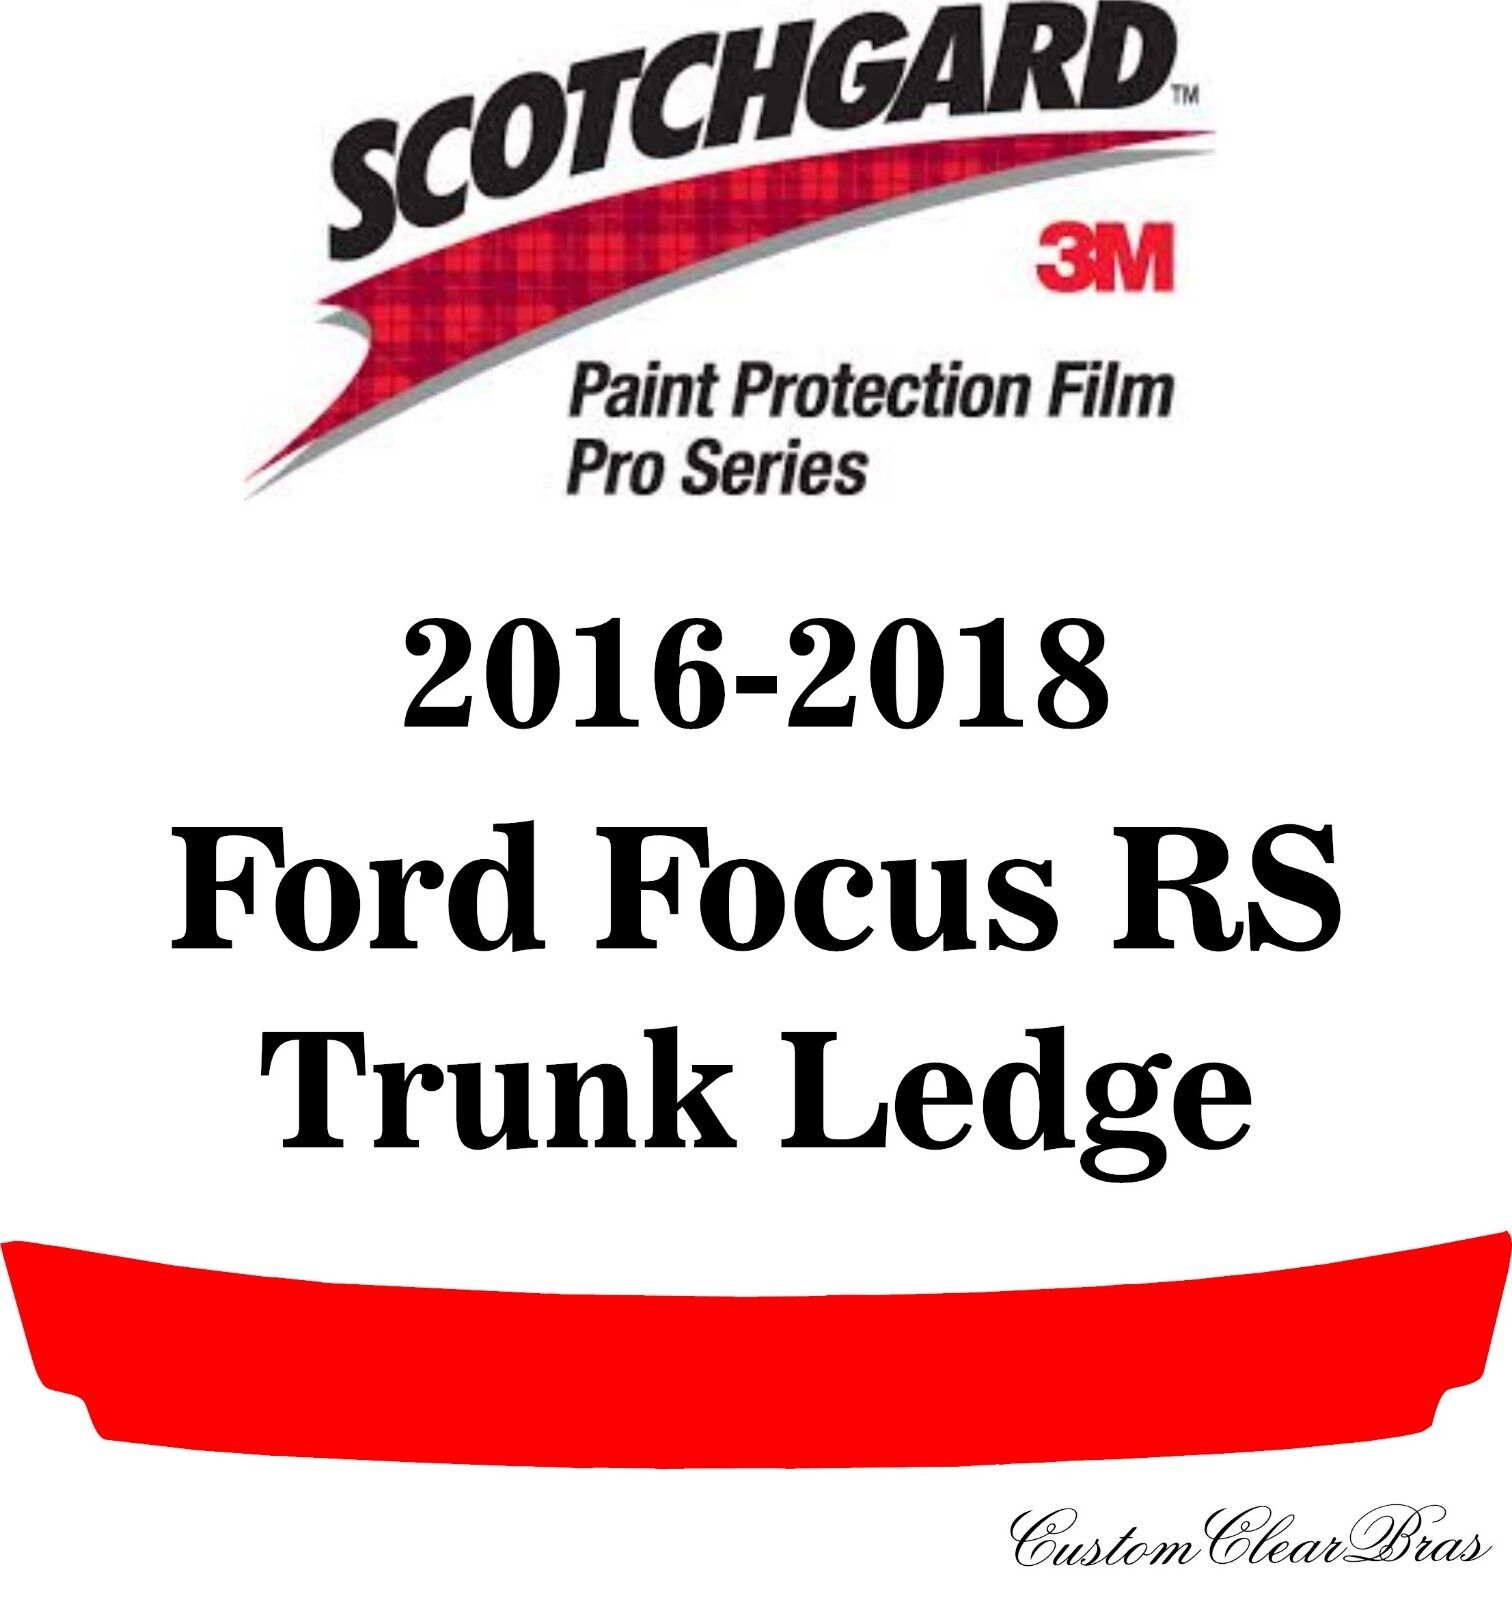 3M Scotchgard Paint Protection Film Pro Series 2016 2017 2018 Ford Focus RS